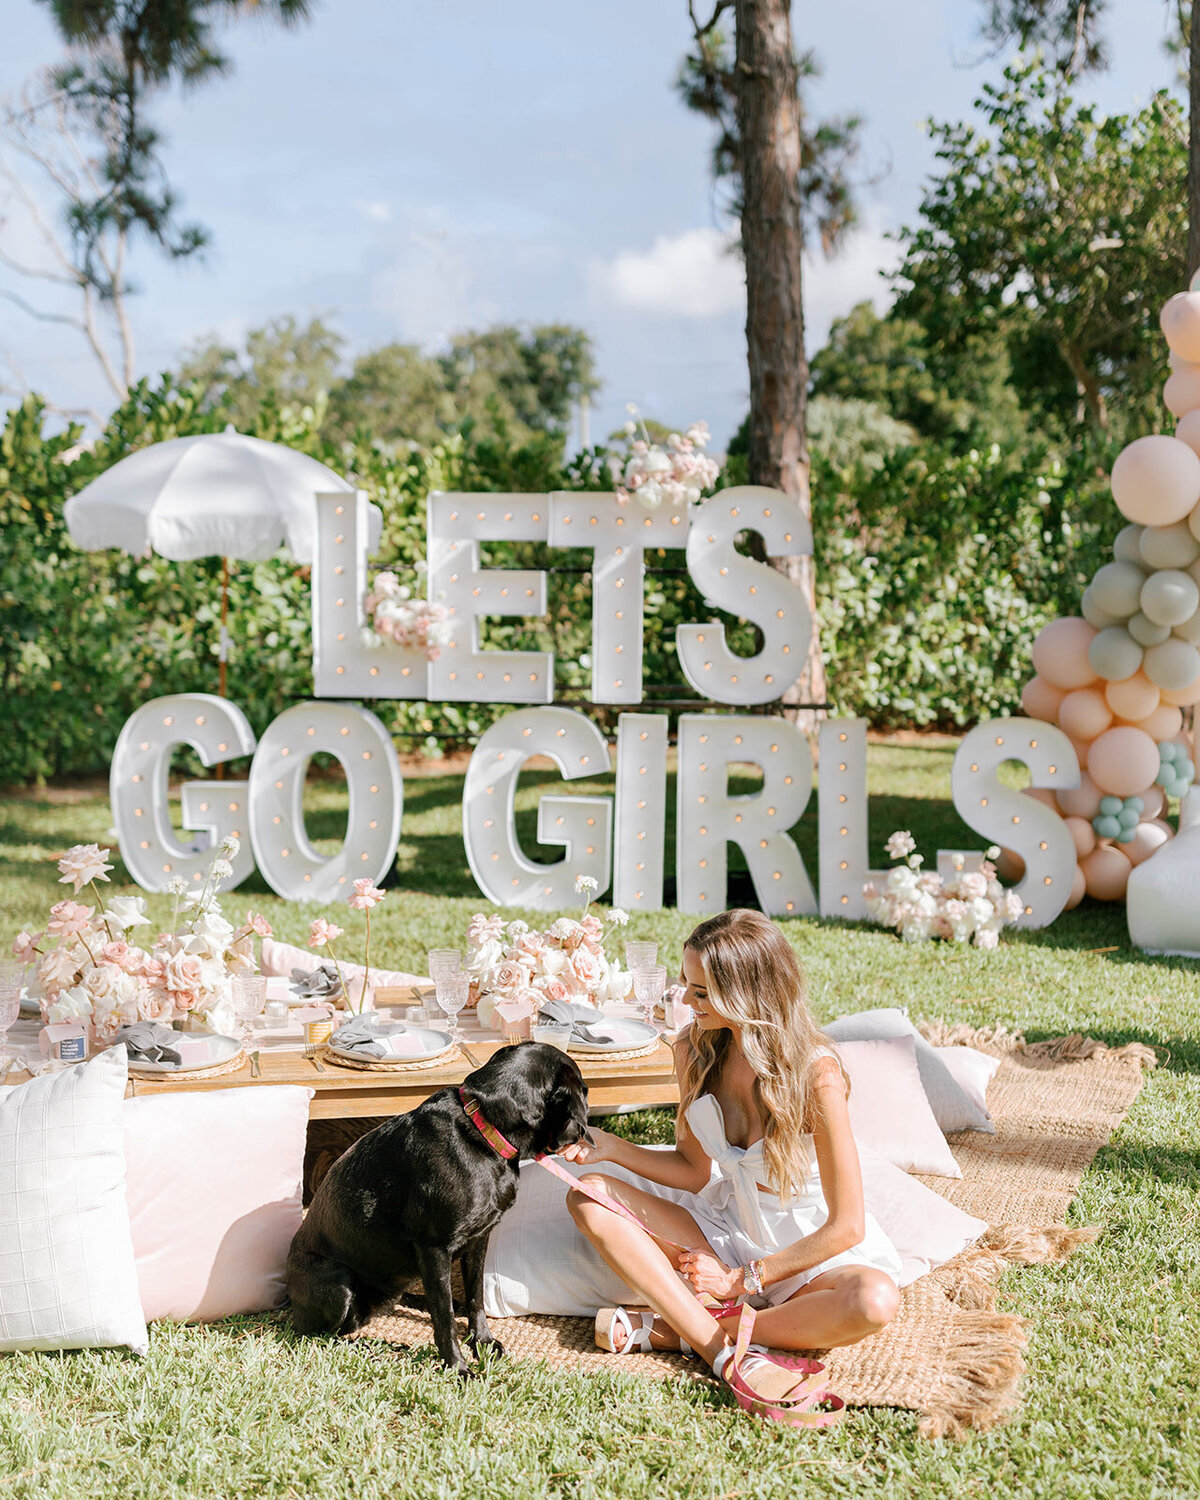 Chrissy O_Neill & Co. - Let_s Go Girls picnic happy hour party hosted by Jena Sims_ Boozie Bluebell_ The Blonde Balloon_ and Emme Events in Jupiter_ Florida-204